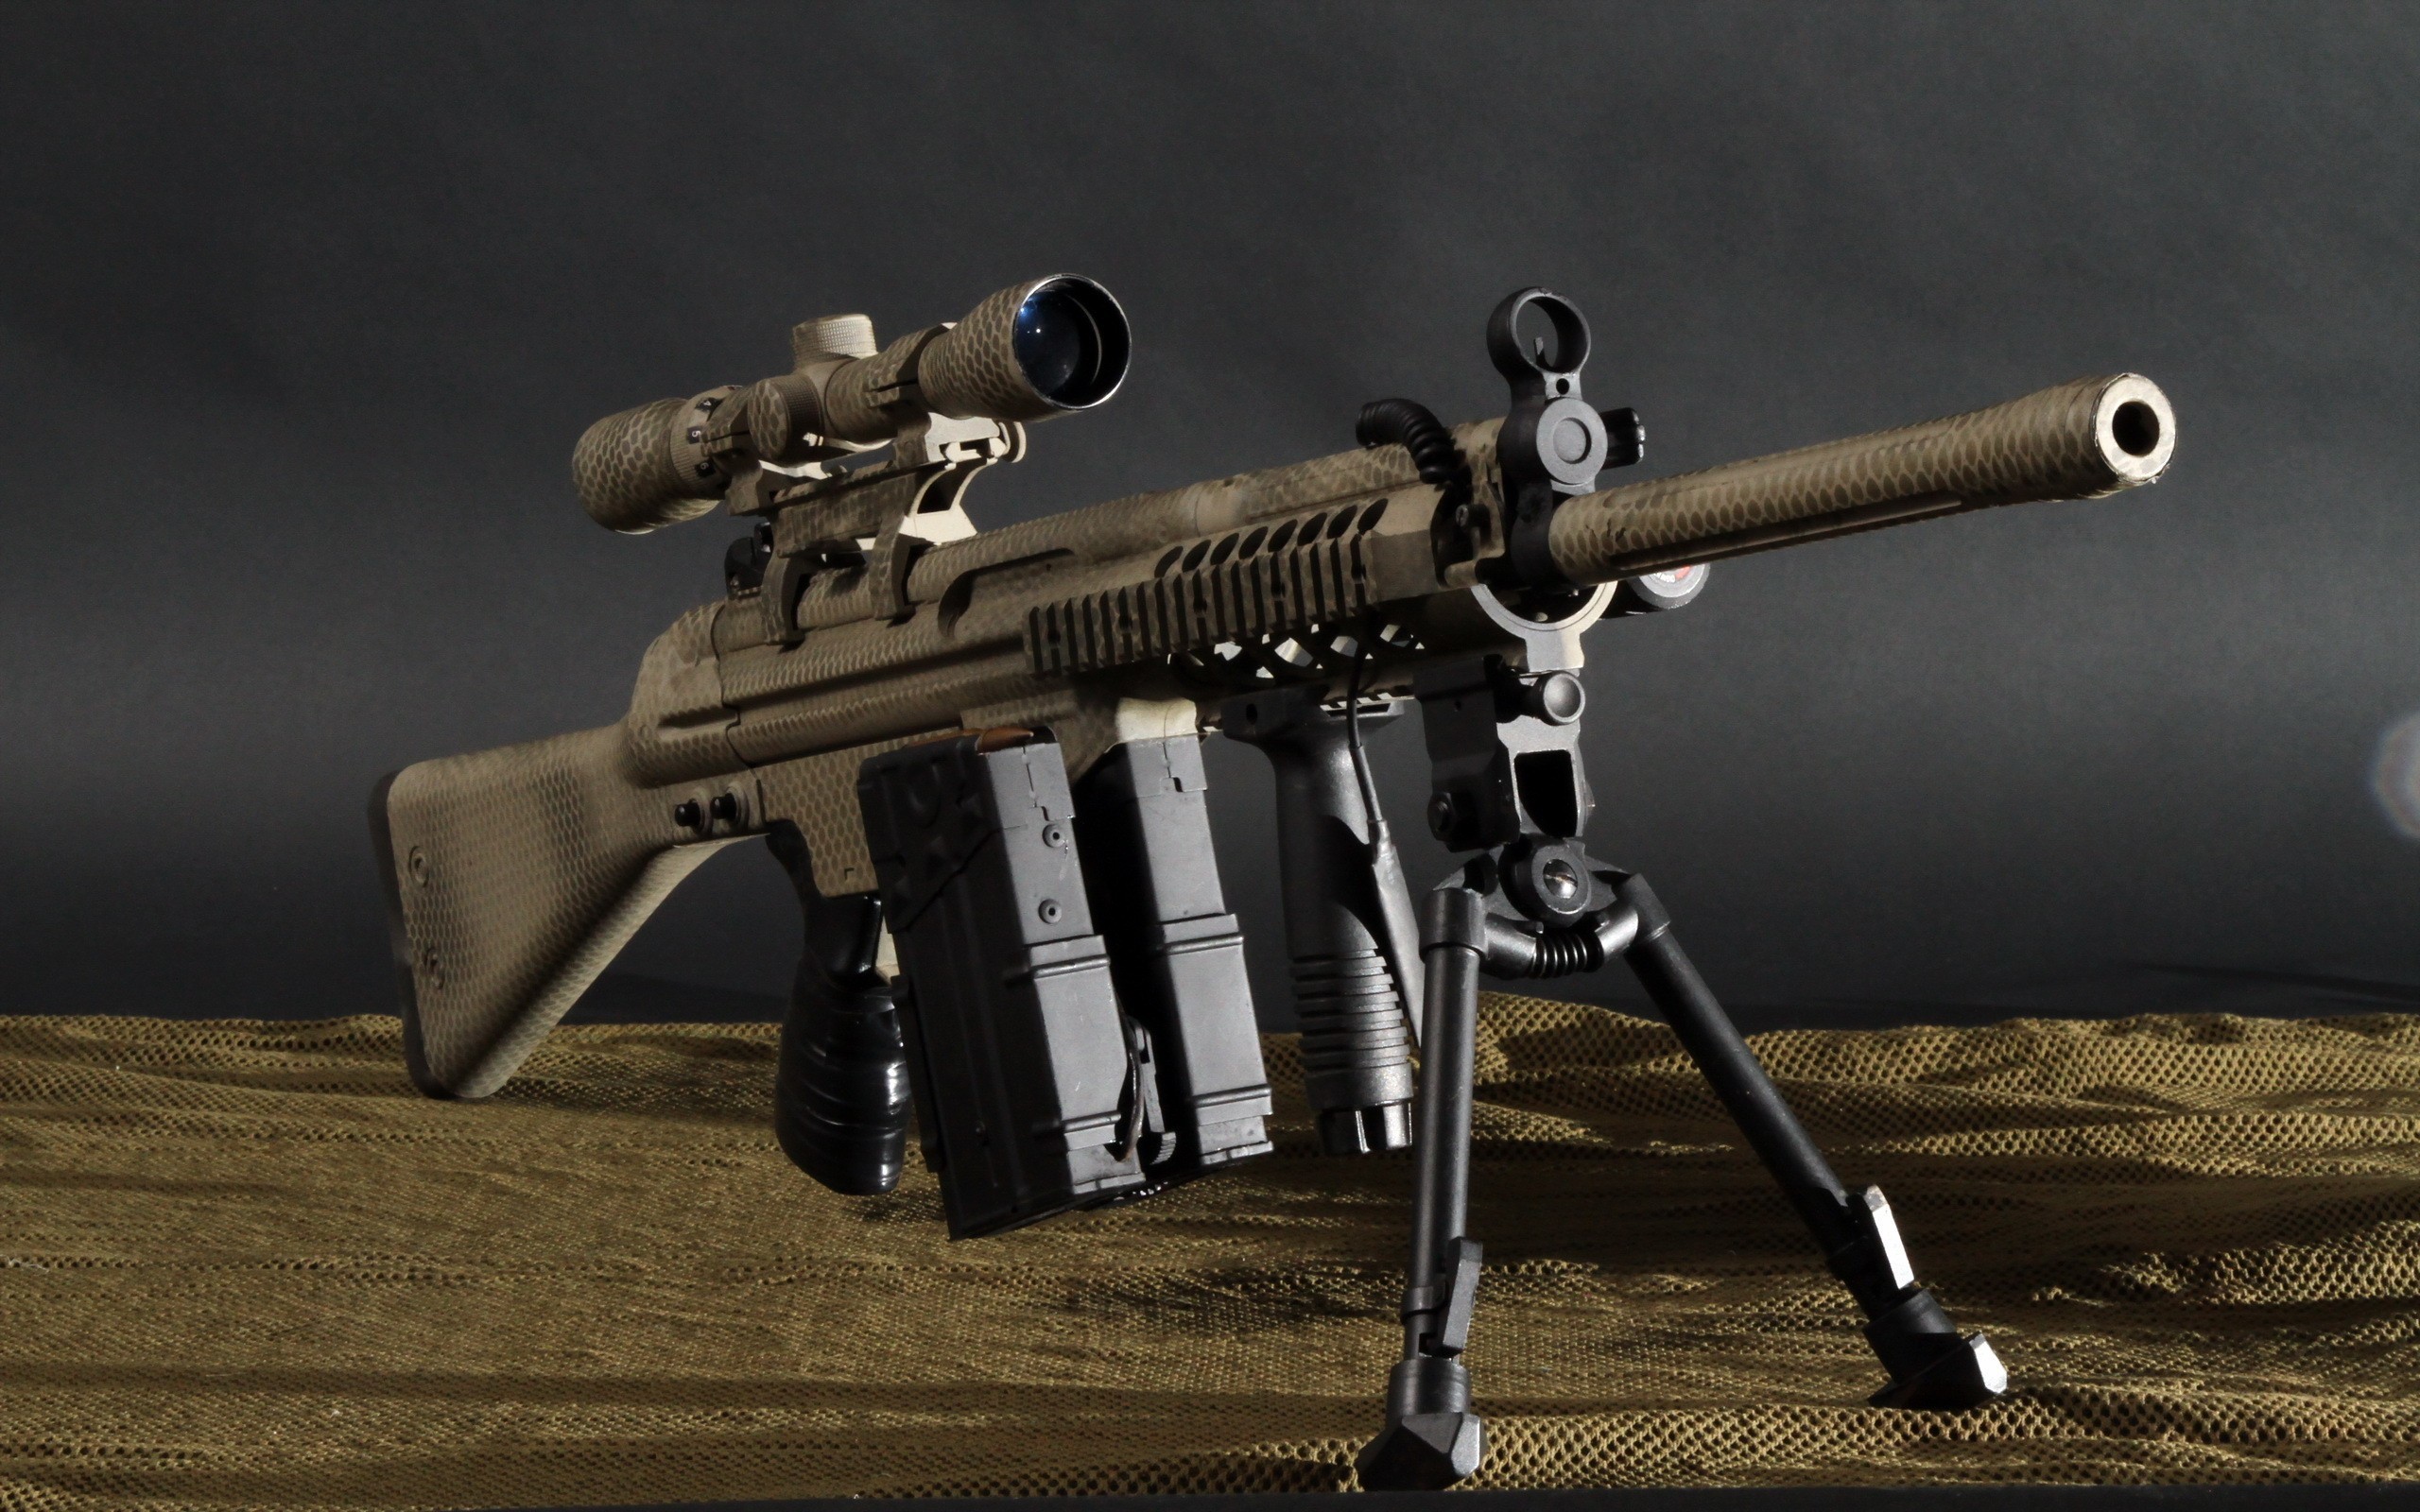 2560x1600 Sniper Rifles HD Wallpapers are free to download from AMB Wallpapers .